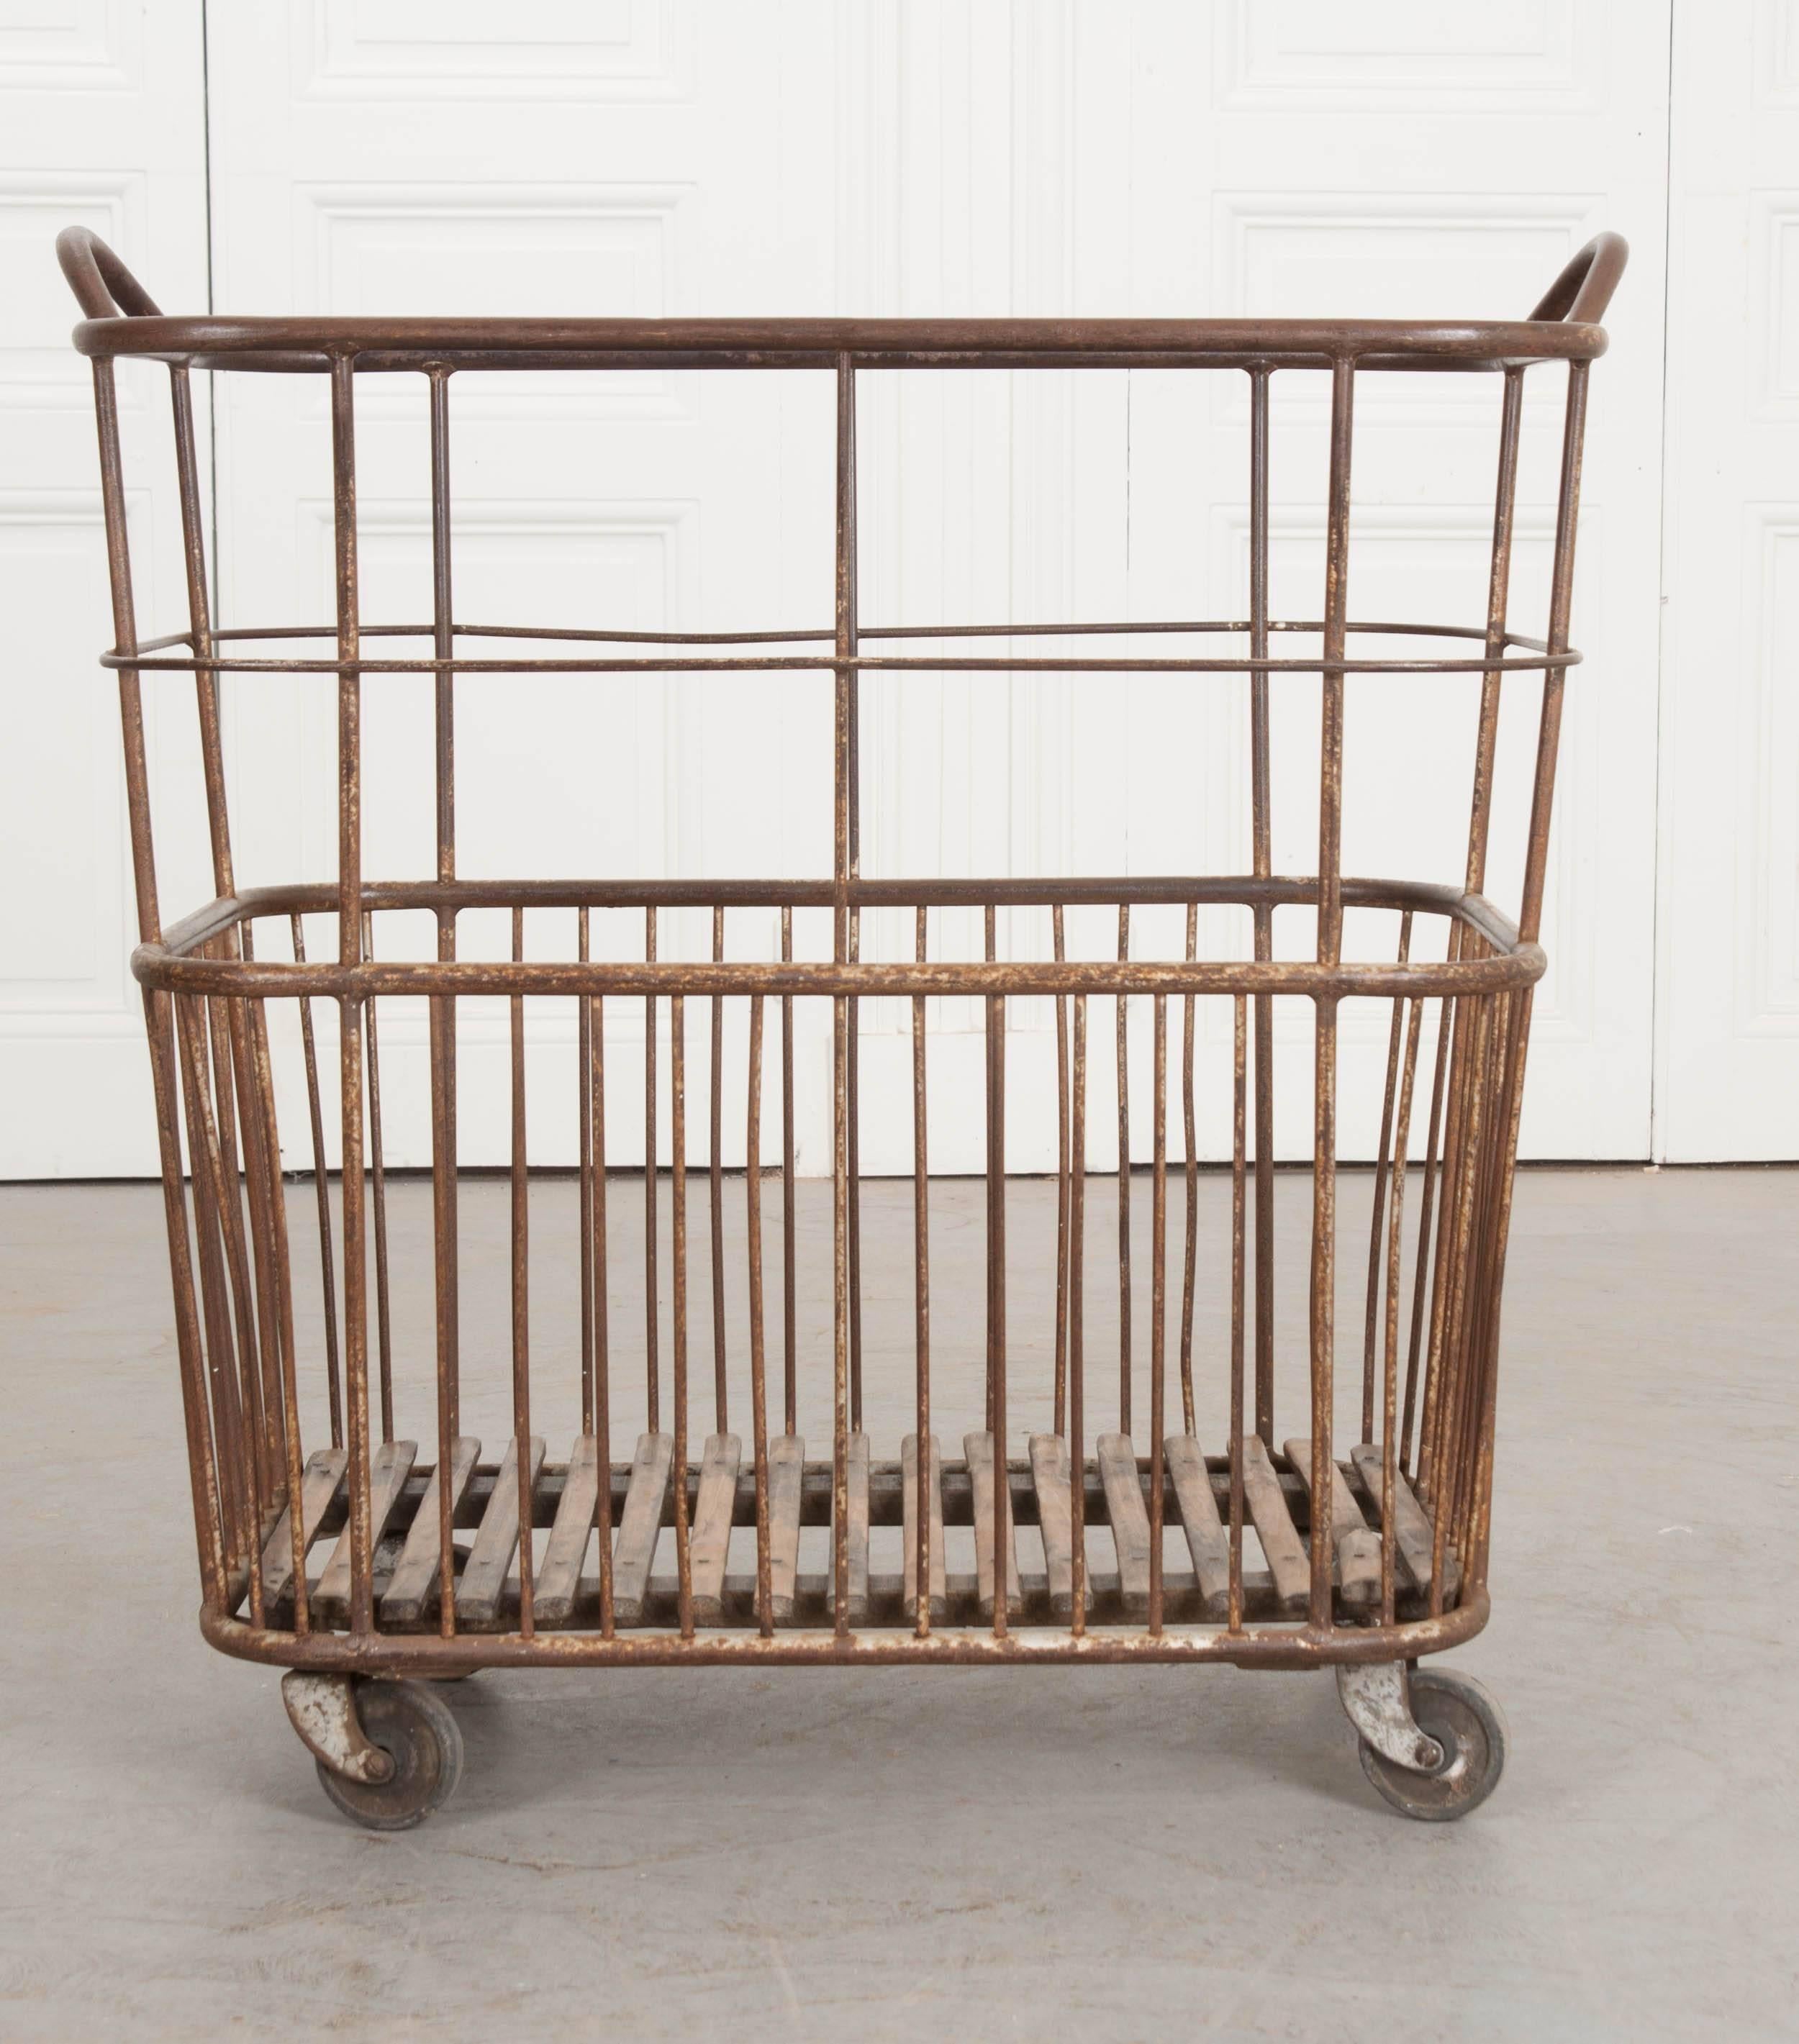 A delightful French bakery or baguette basket from the early part of the 20th century, France. The tall metal basket has two handles and rolls on caster wheels for easy movement. The bottom is made of wooden slats that have been slowly patinated